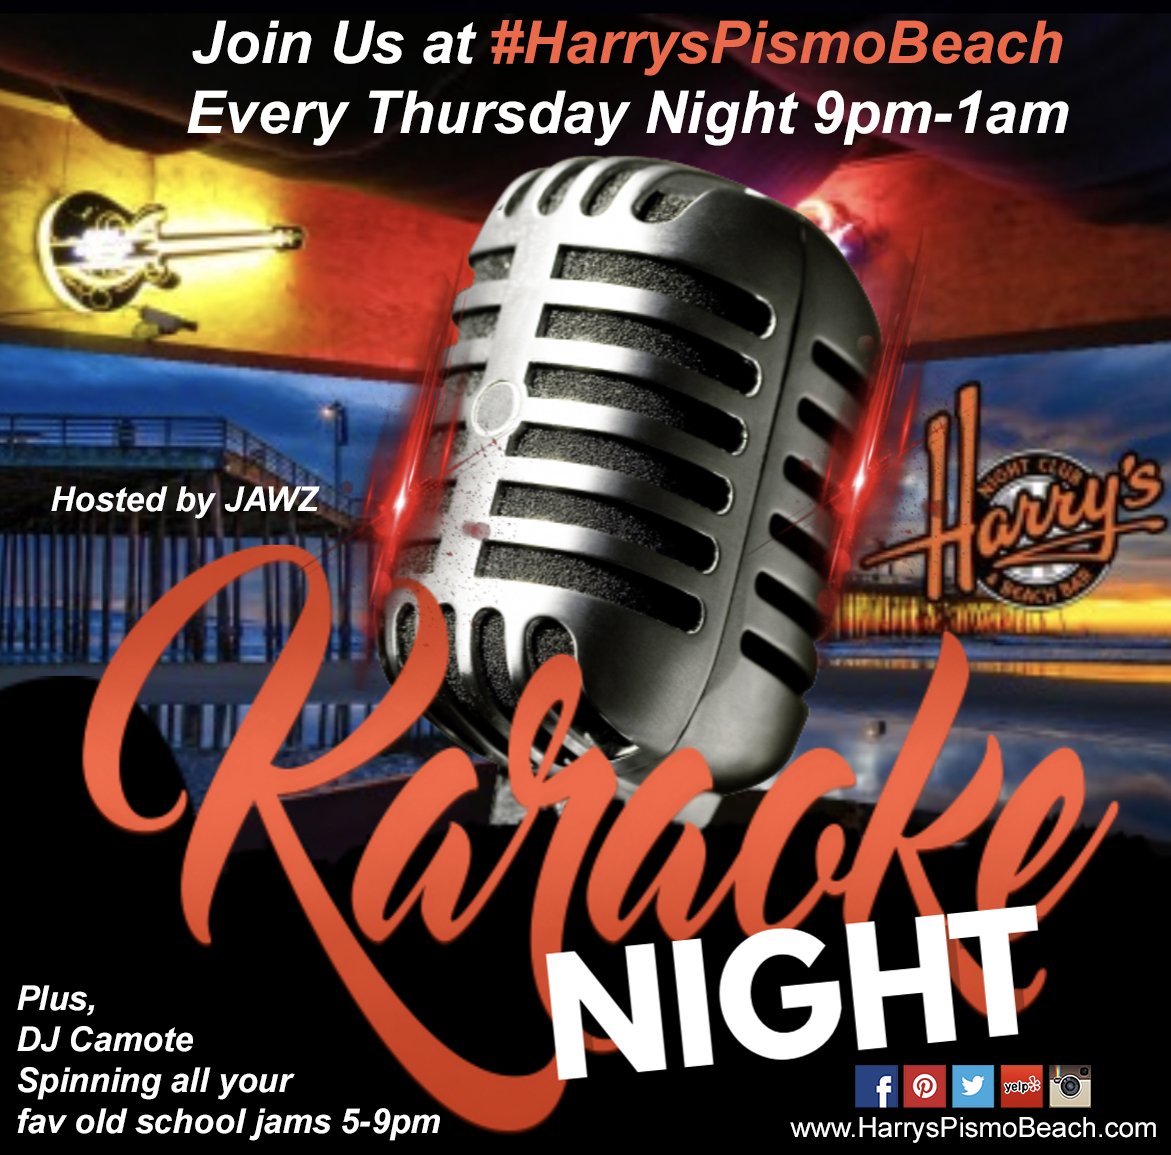 Tonight FRONT ROW KARAOKE is hosting our #KaraokeNight at #HarrysPismoBeach tonight at 9pm! Plus, we've got #DJCamote from 5-9 spinning all your favorite 80s/90s and old school tunes! Come on down and join us! It's one of the best nights to be at Harry's!